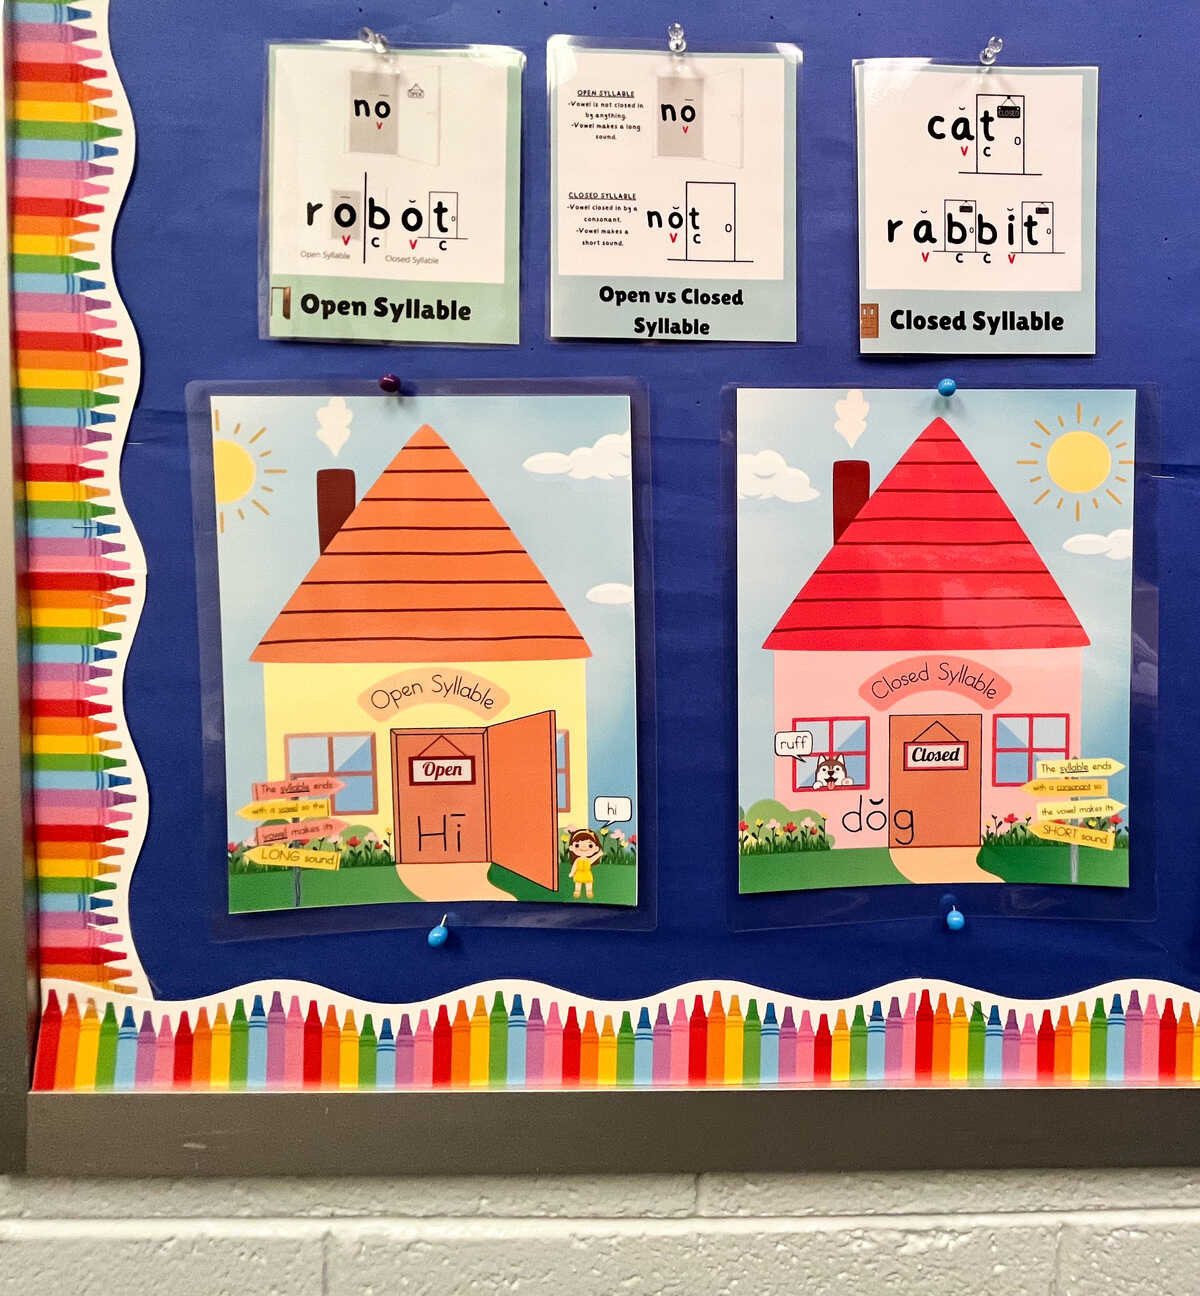 Open & Closed syllable house posters on a bulletin board. 